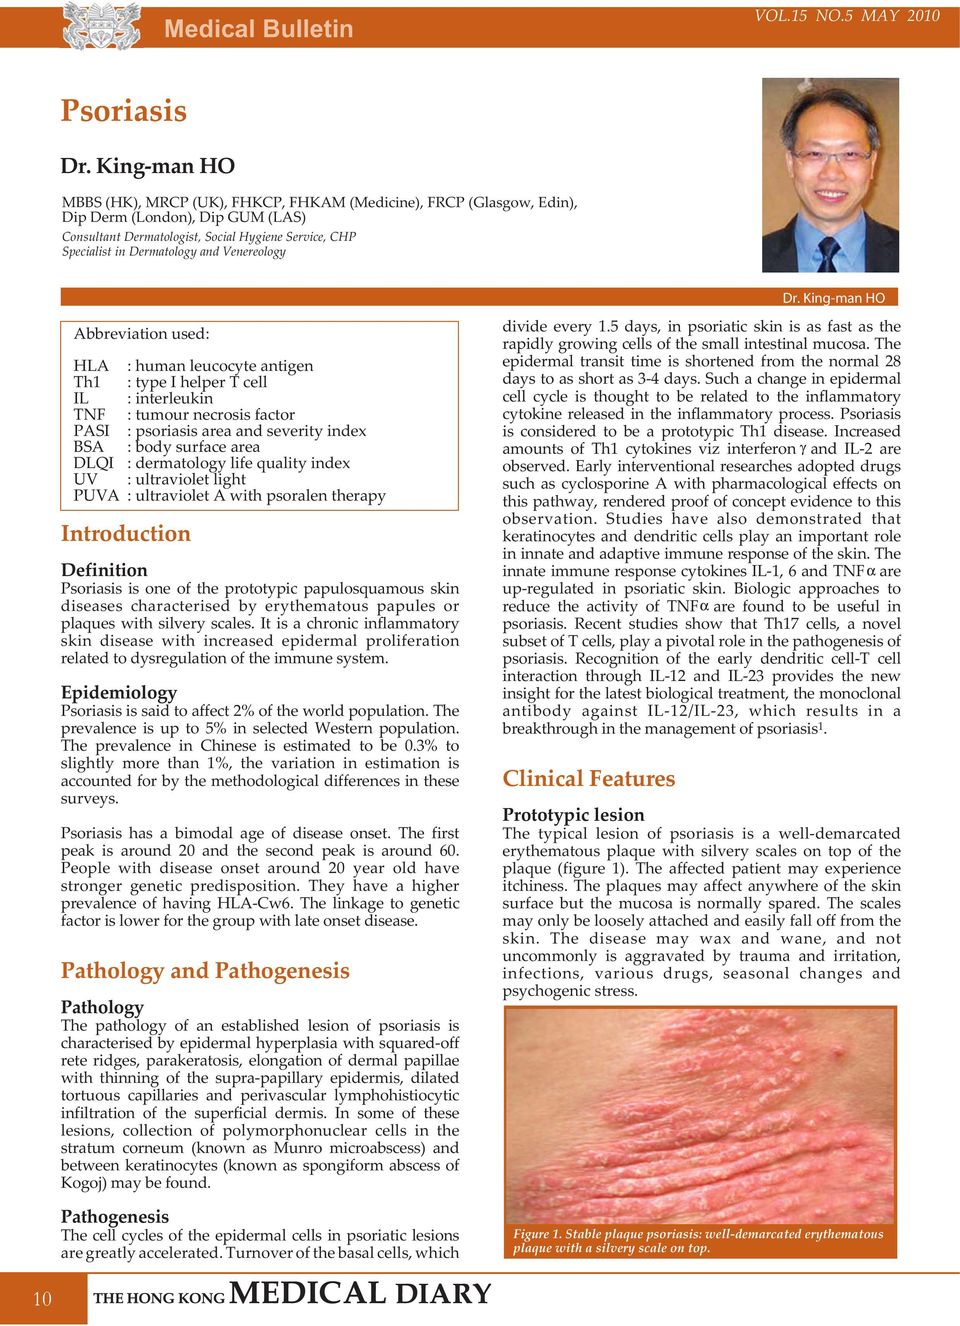 dermatology life quality index UV : ultraviolet light PUVA : ultraviolet A with psoralen therapy Introduction Definition is one of the prototypic papulosquamous skin diseases characterised by